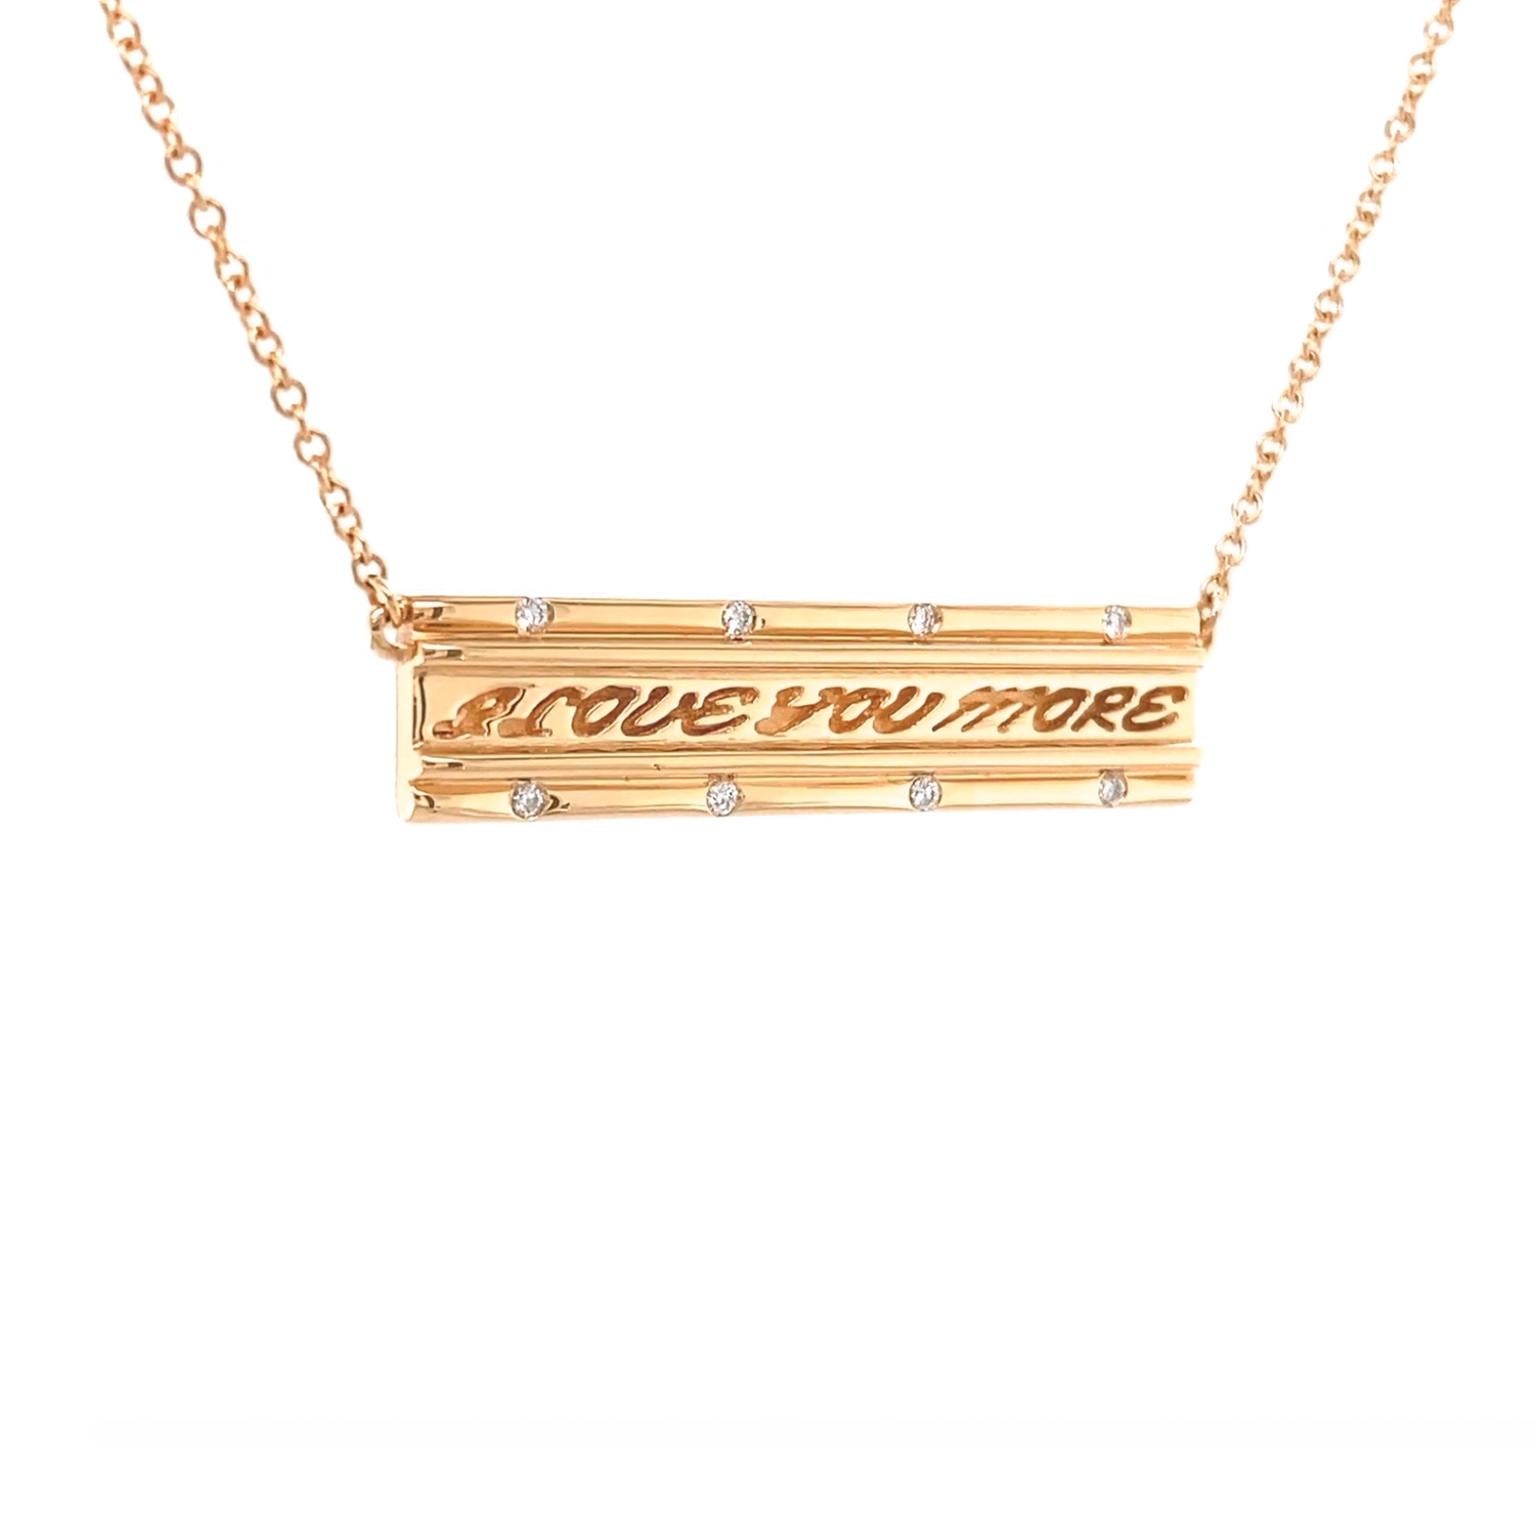 Love and diamonds adorn this pendant. The 18k pink gold base is shaped into a bar. In the center are the engraved words 'I love you more.' Smooth wires embedded along the sides frame the message. Flush set round brilliant cut diamonds bring